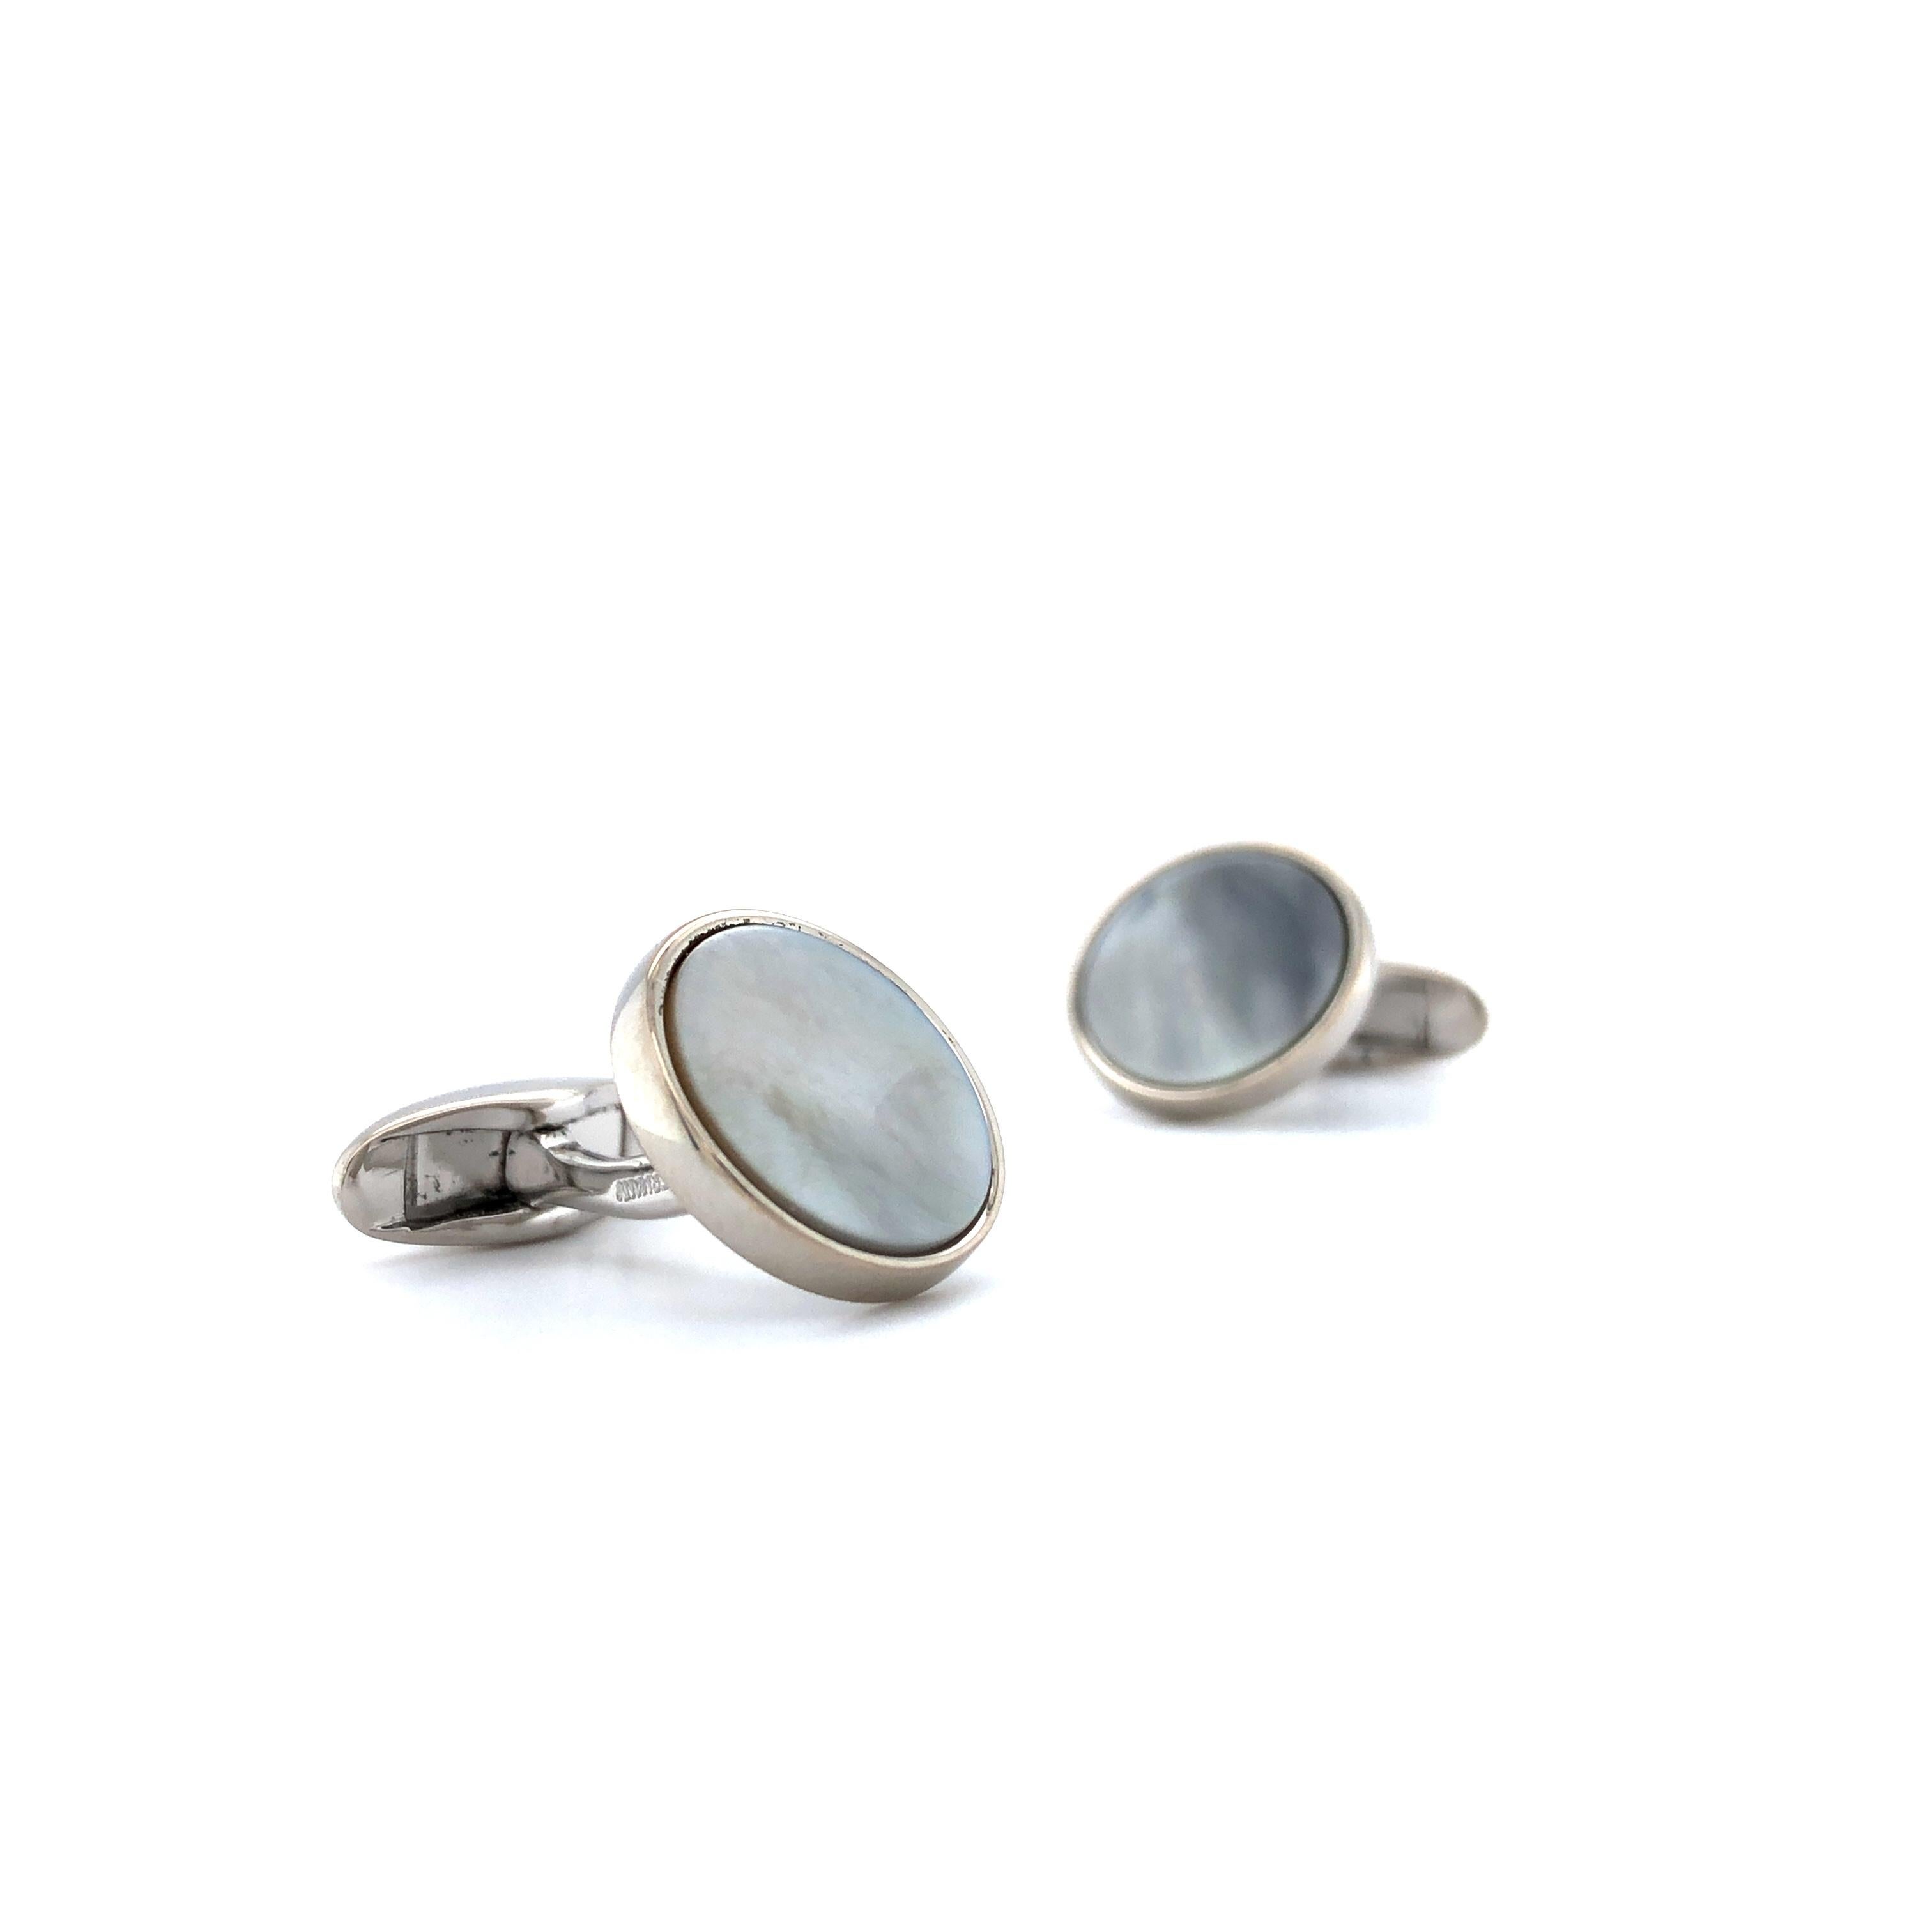 Men's Round Cufflinks - 925 Sterling Silver - Mother of Pearl Inlay - Diameter 15 mm For Sale